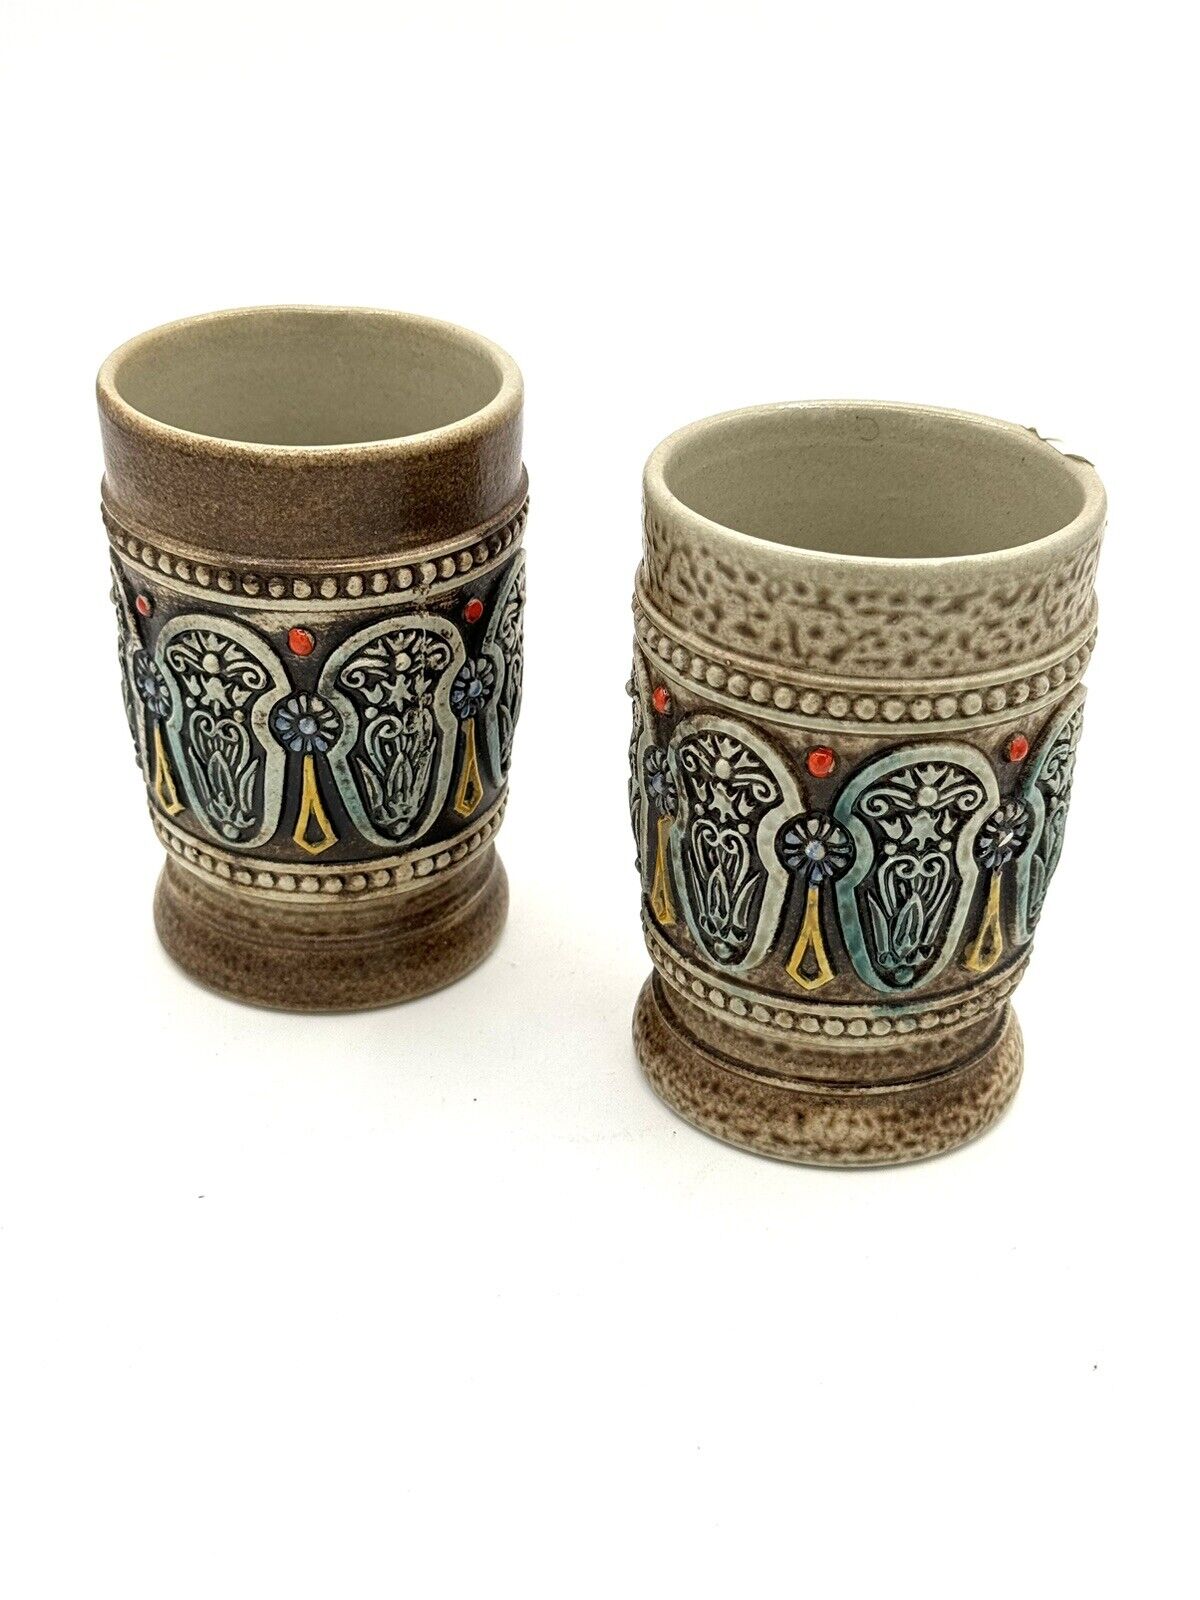 Vintage GERZ Germany Beer Cups Steins Set of 2 Pottery Colorful